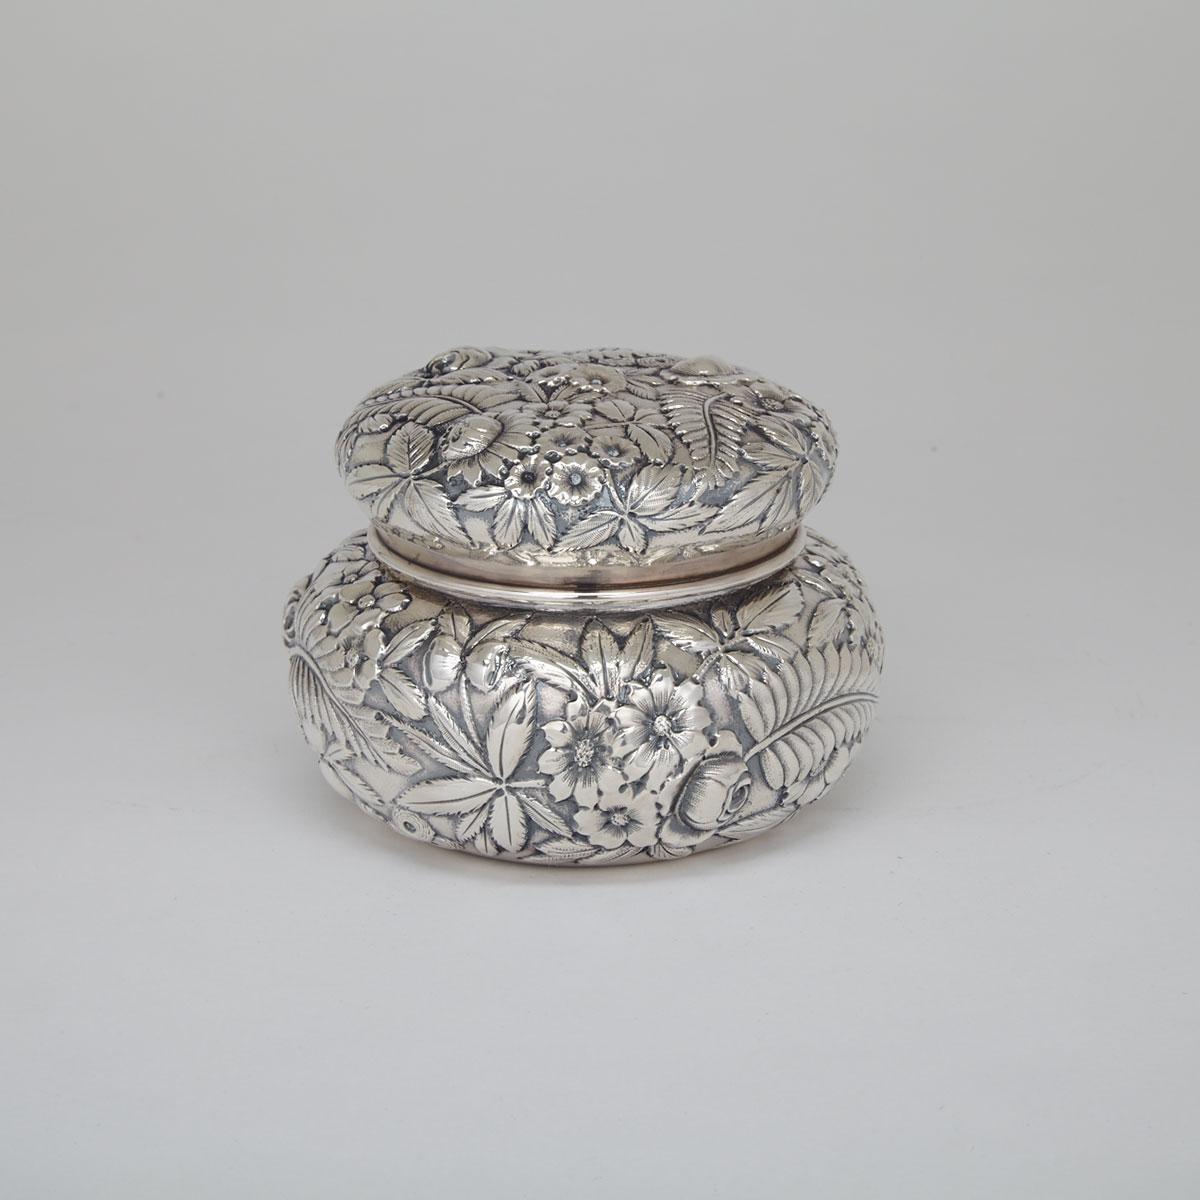 American Silver Covered Jar, S. Kirk & Son Co., Baltimore, Md., c.1900